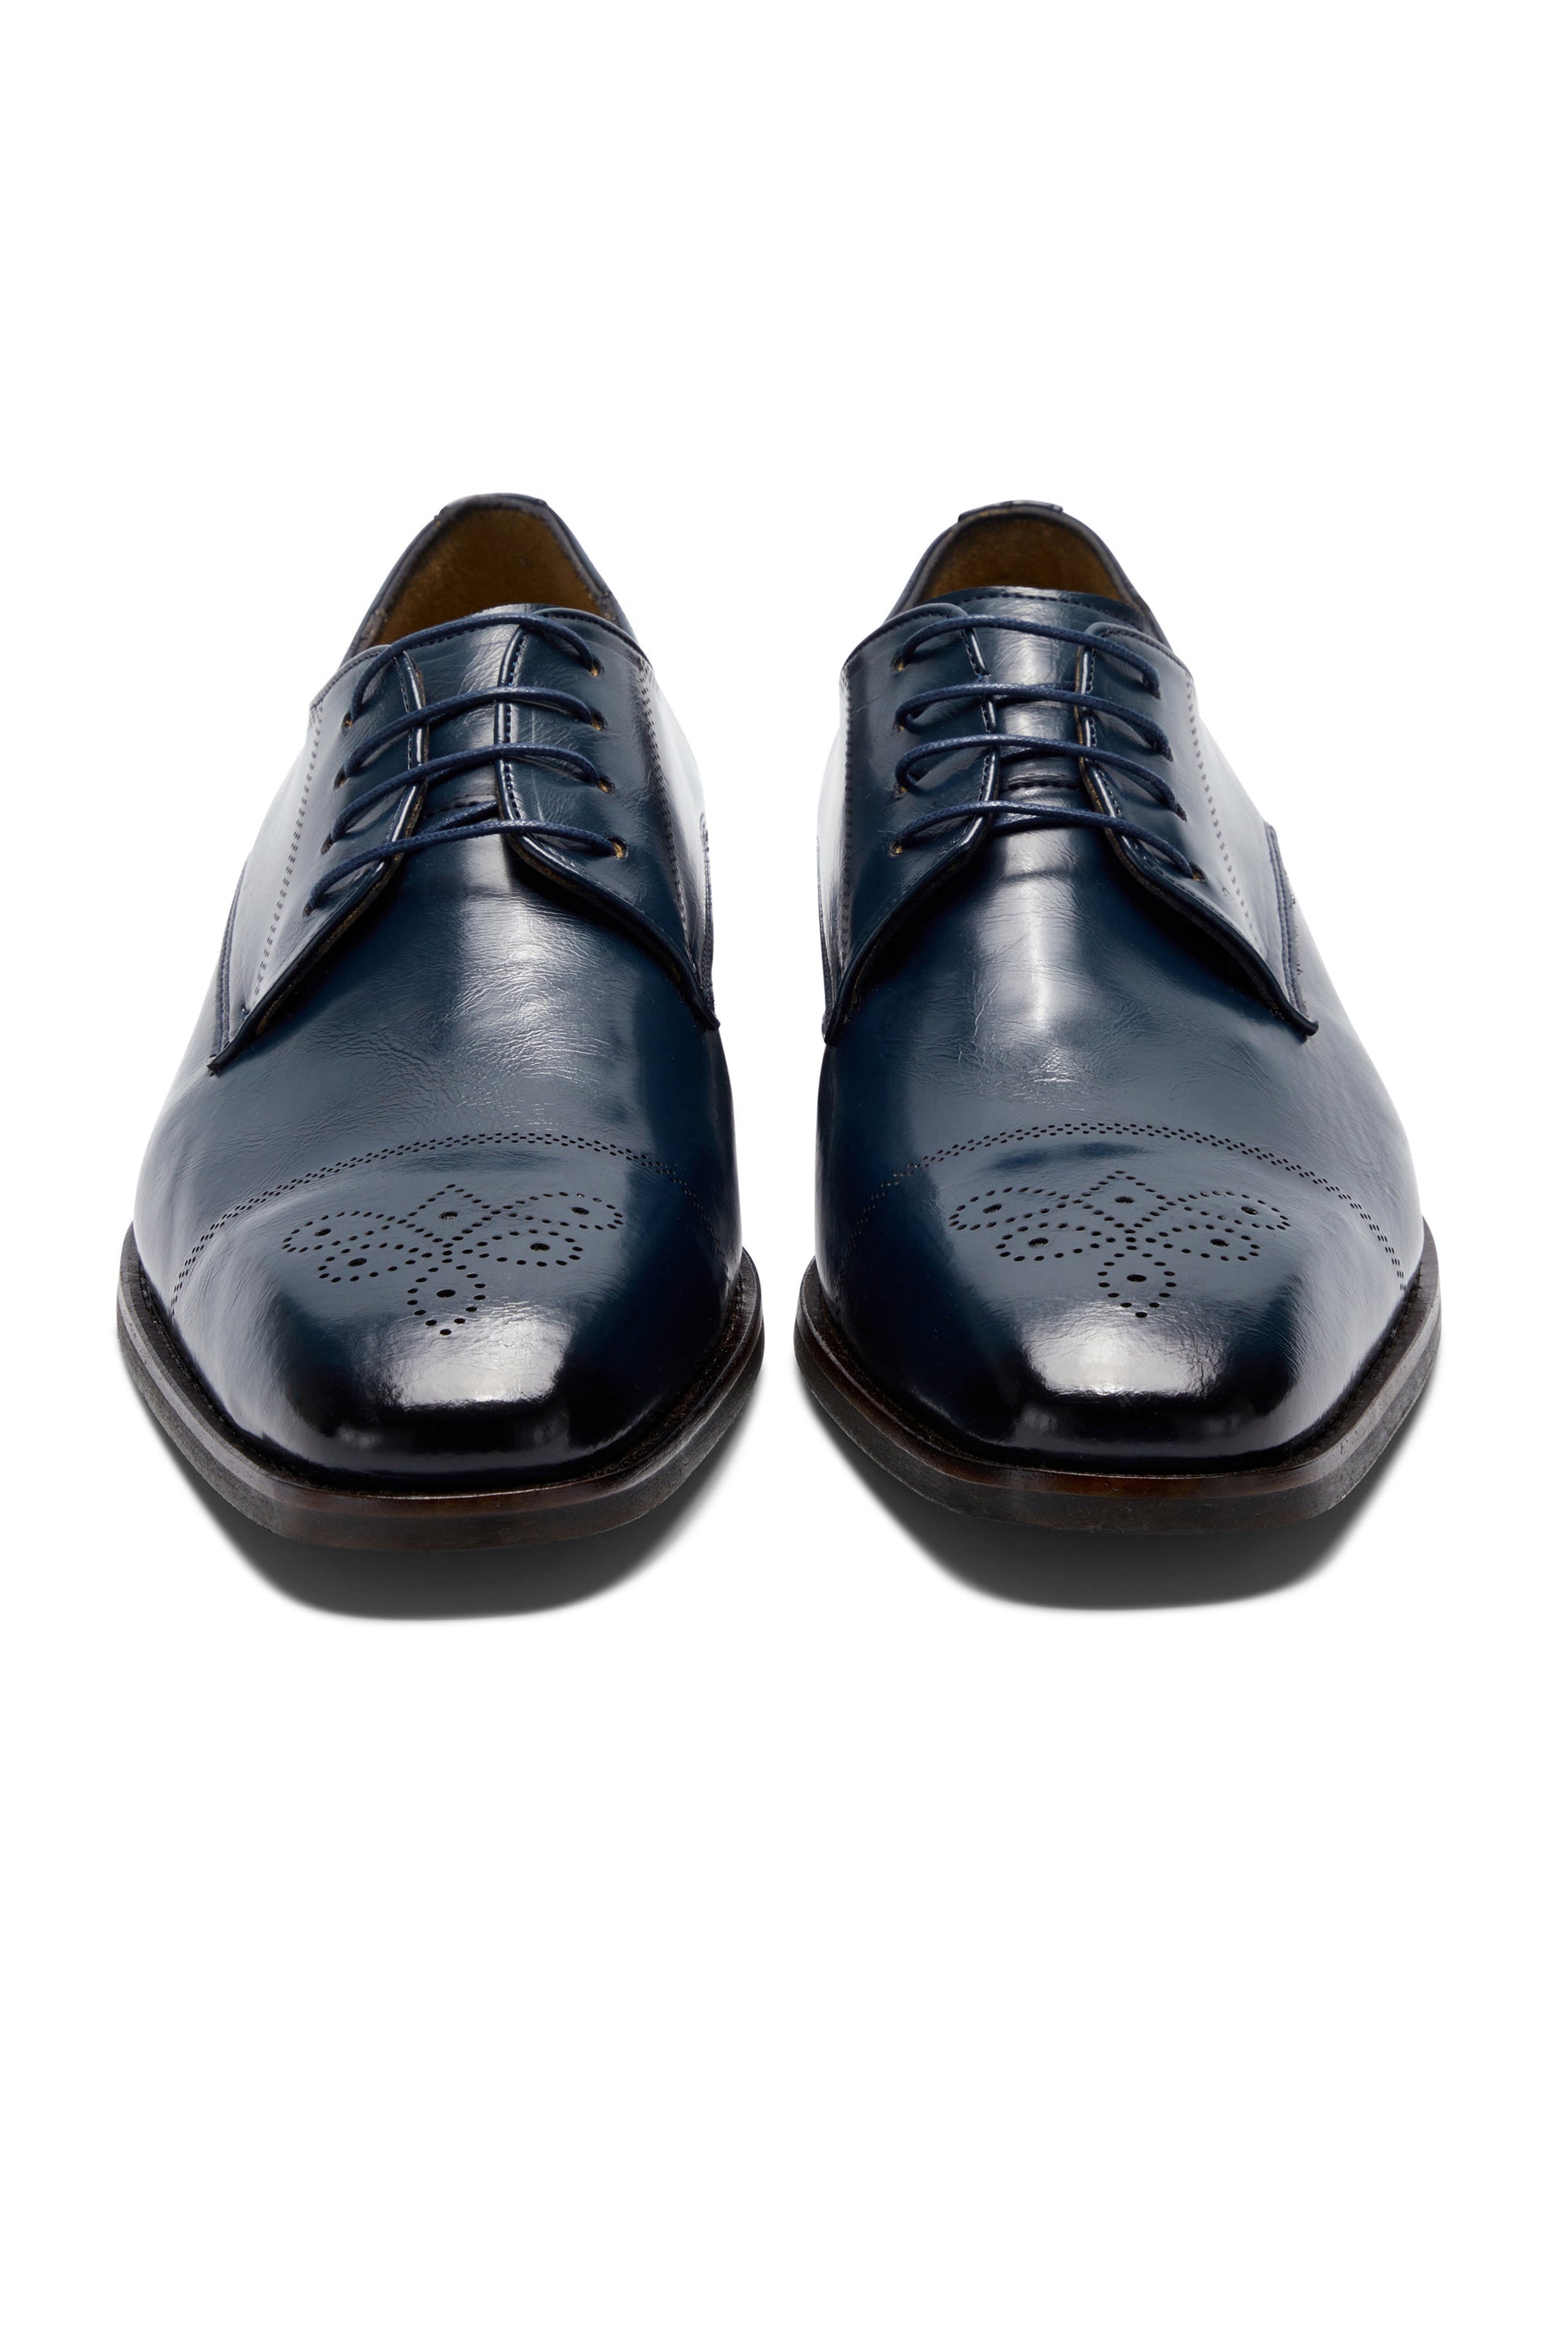 Louis Navy Formal Mens Shoe-Front view